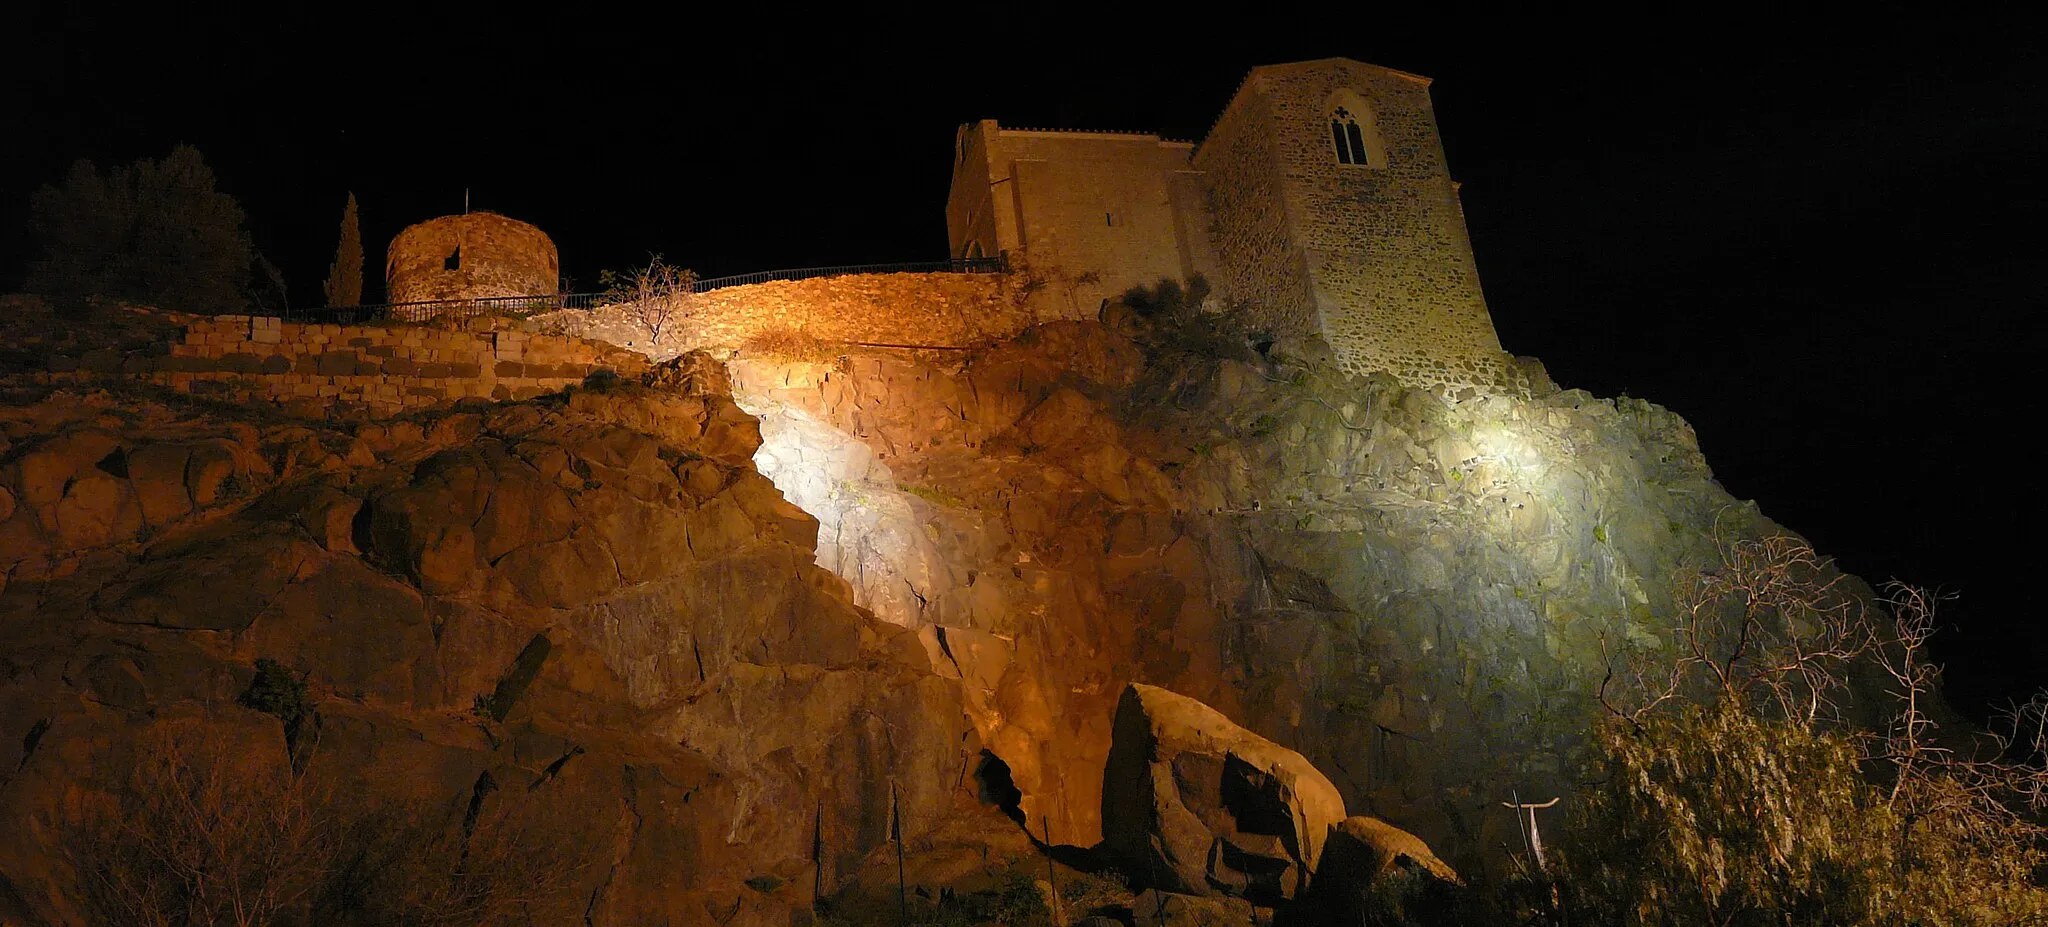 Photo showing: The chapel of La Garde by night